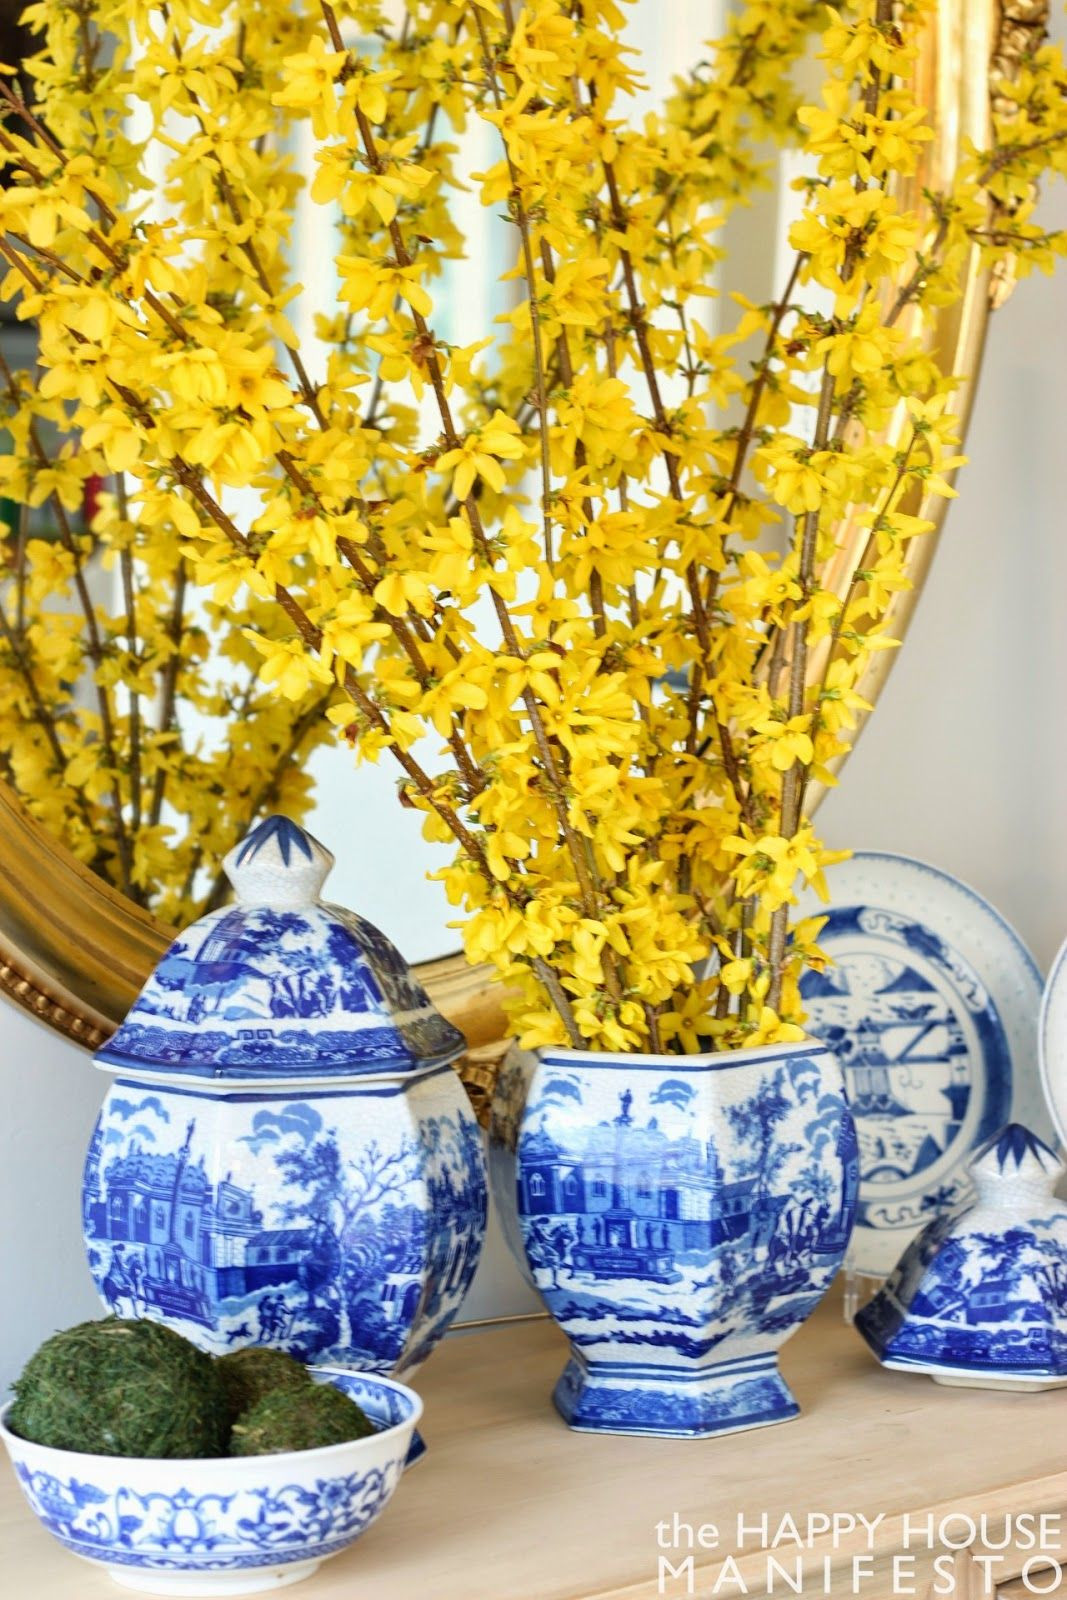 29 Trendy Ralph Lauren Blue and White Vase 2023 free download ralph lauren blue and white vase of image result for flower arrangements in blue and white ceramic jars with image result for flower arrangements in blue and white ceramic jars